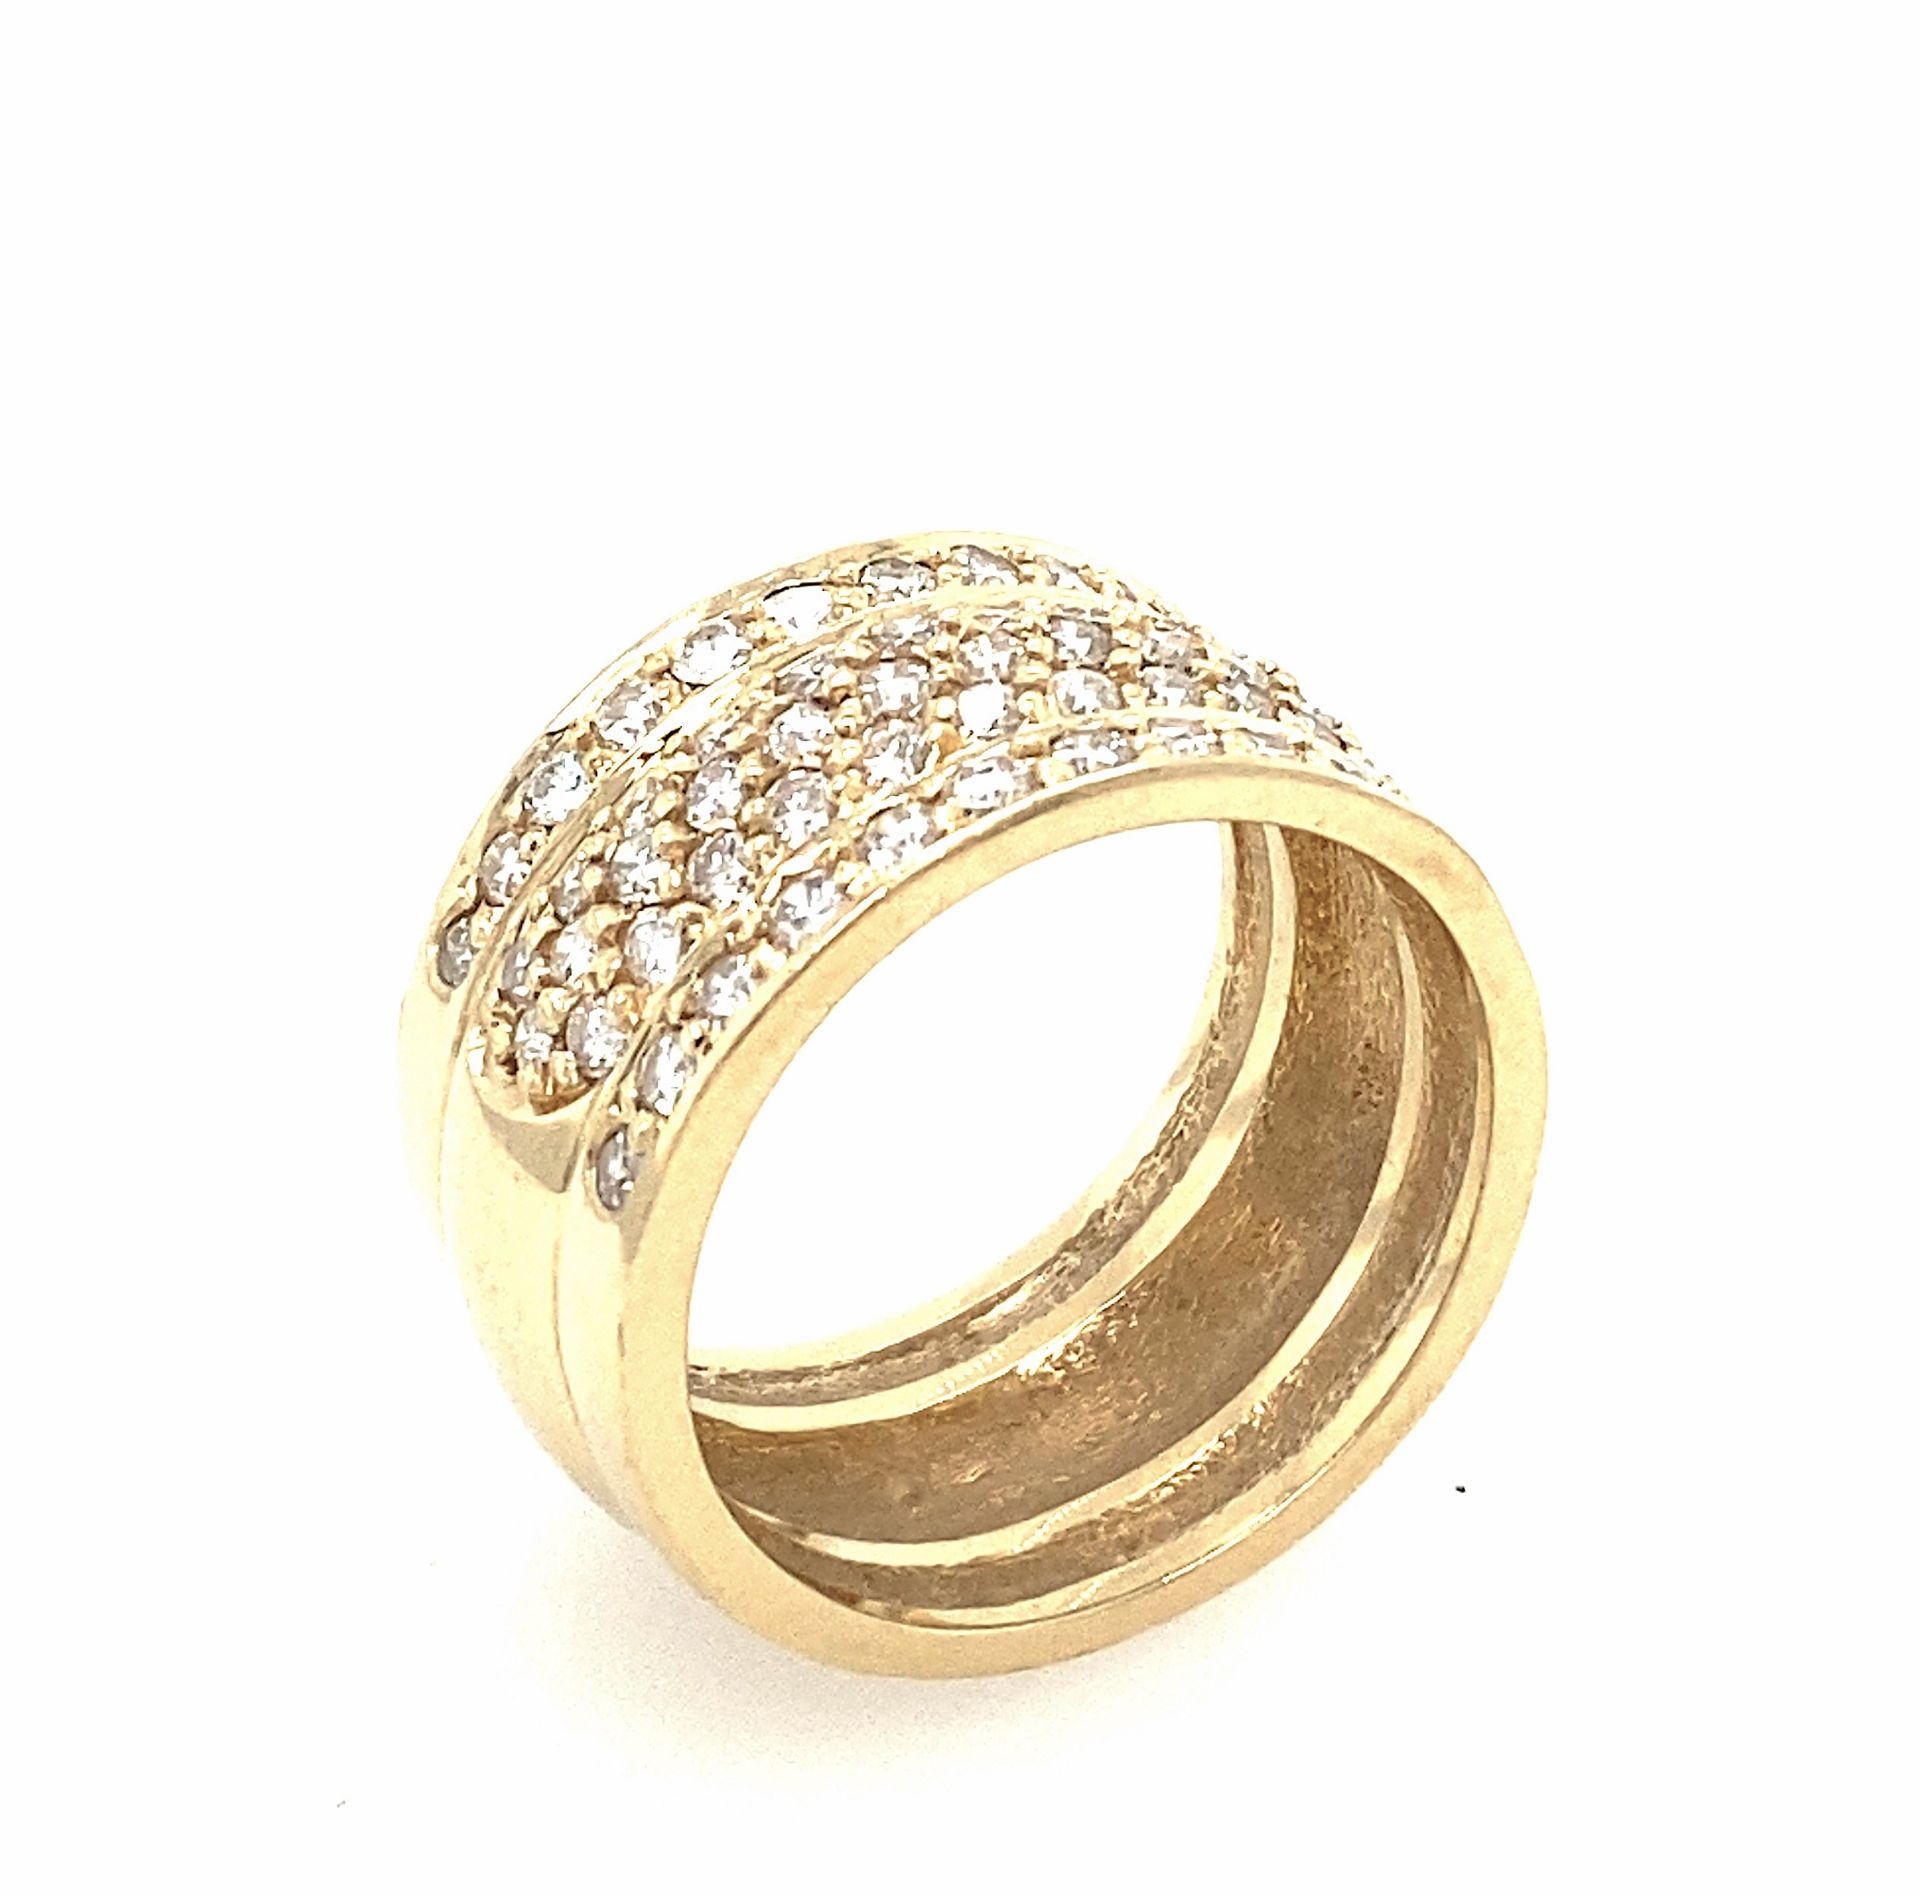 Ring made of 585 gold with total ca. 1,3 ct - Image 2 of 4